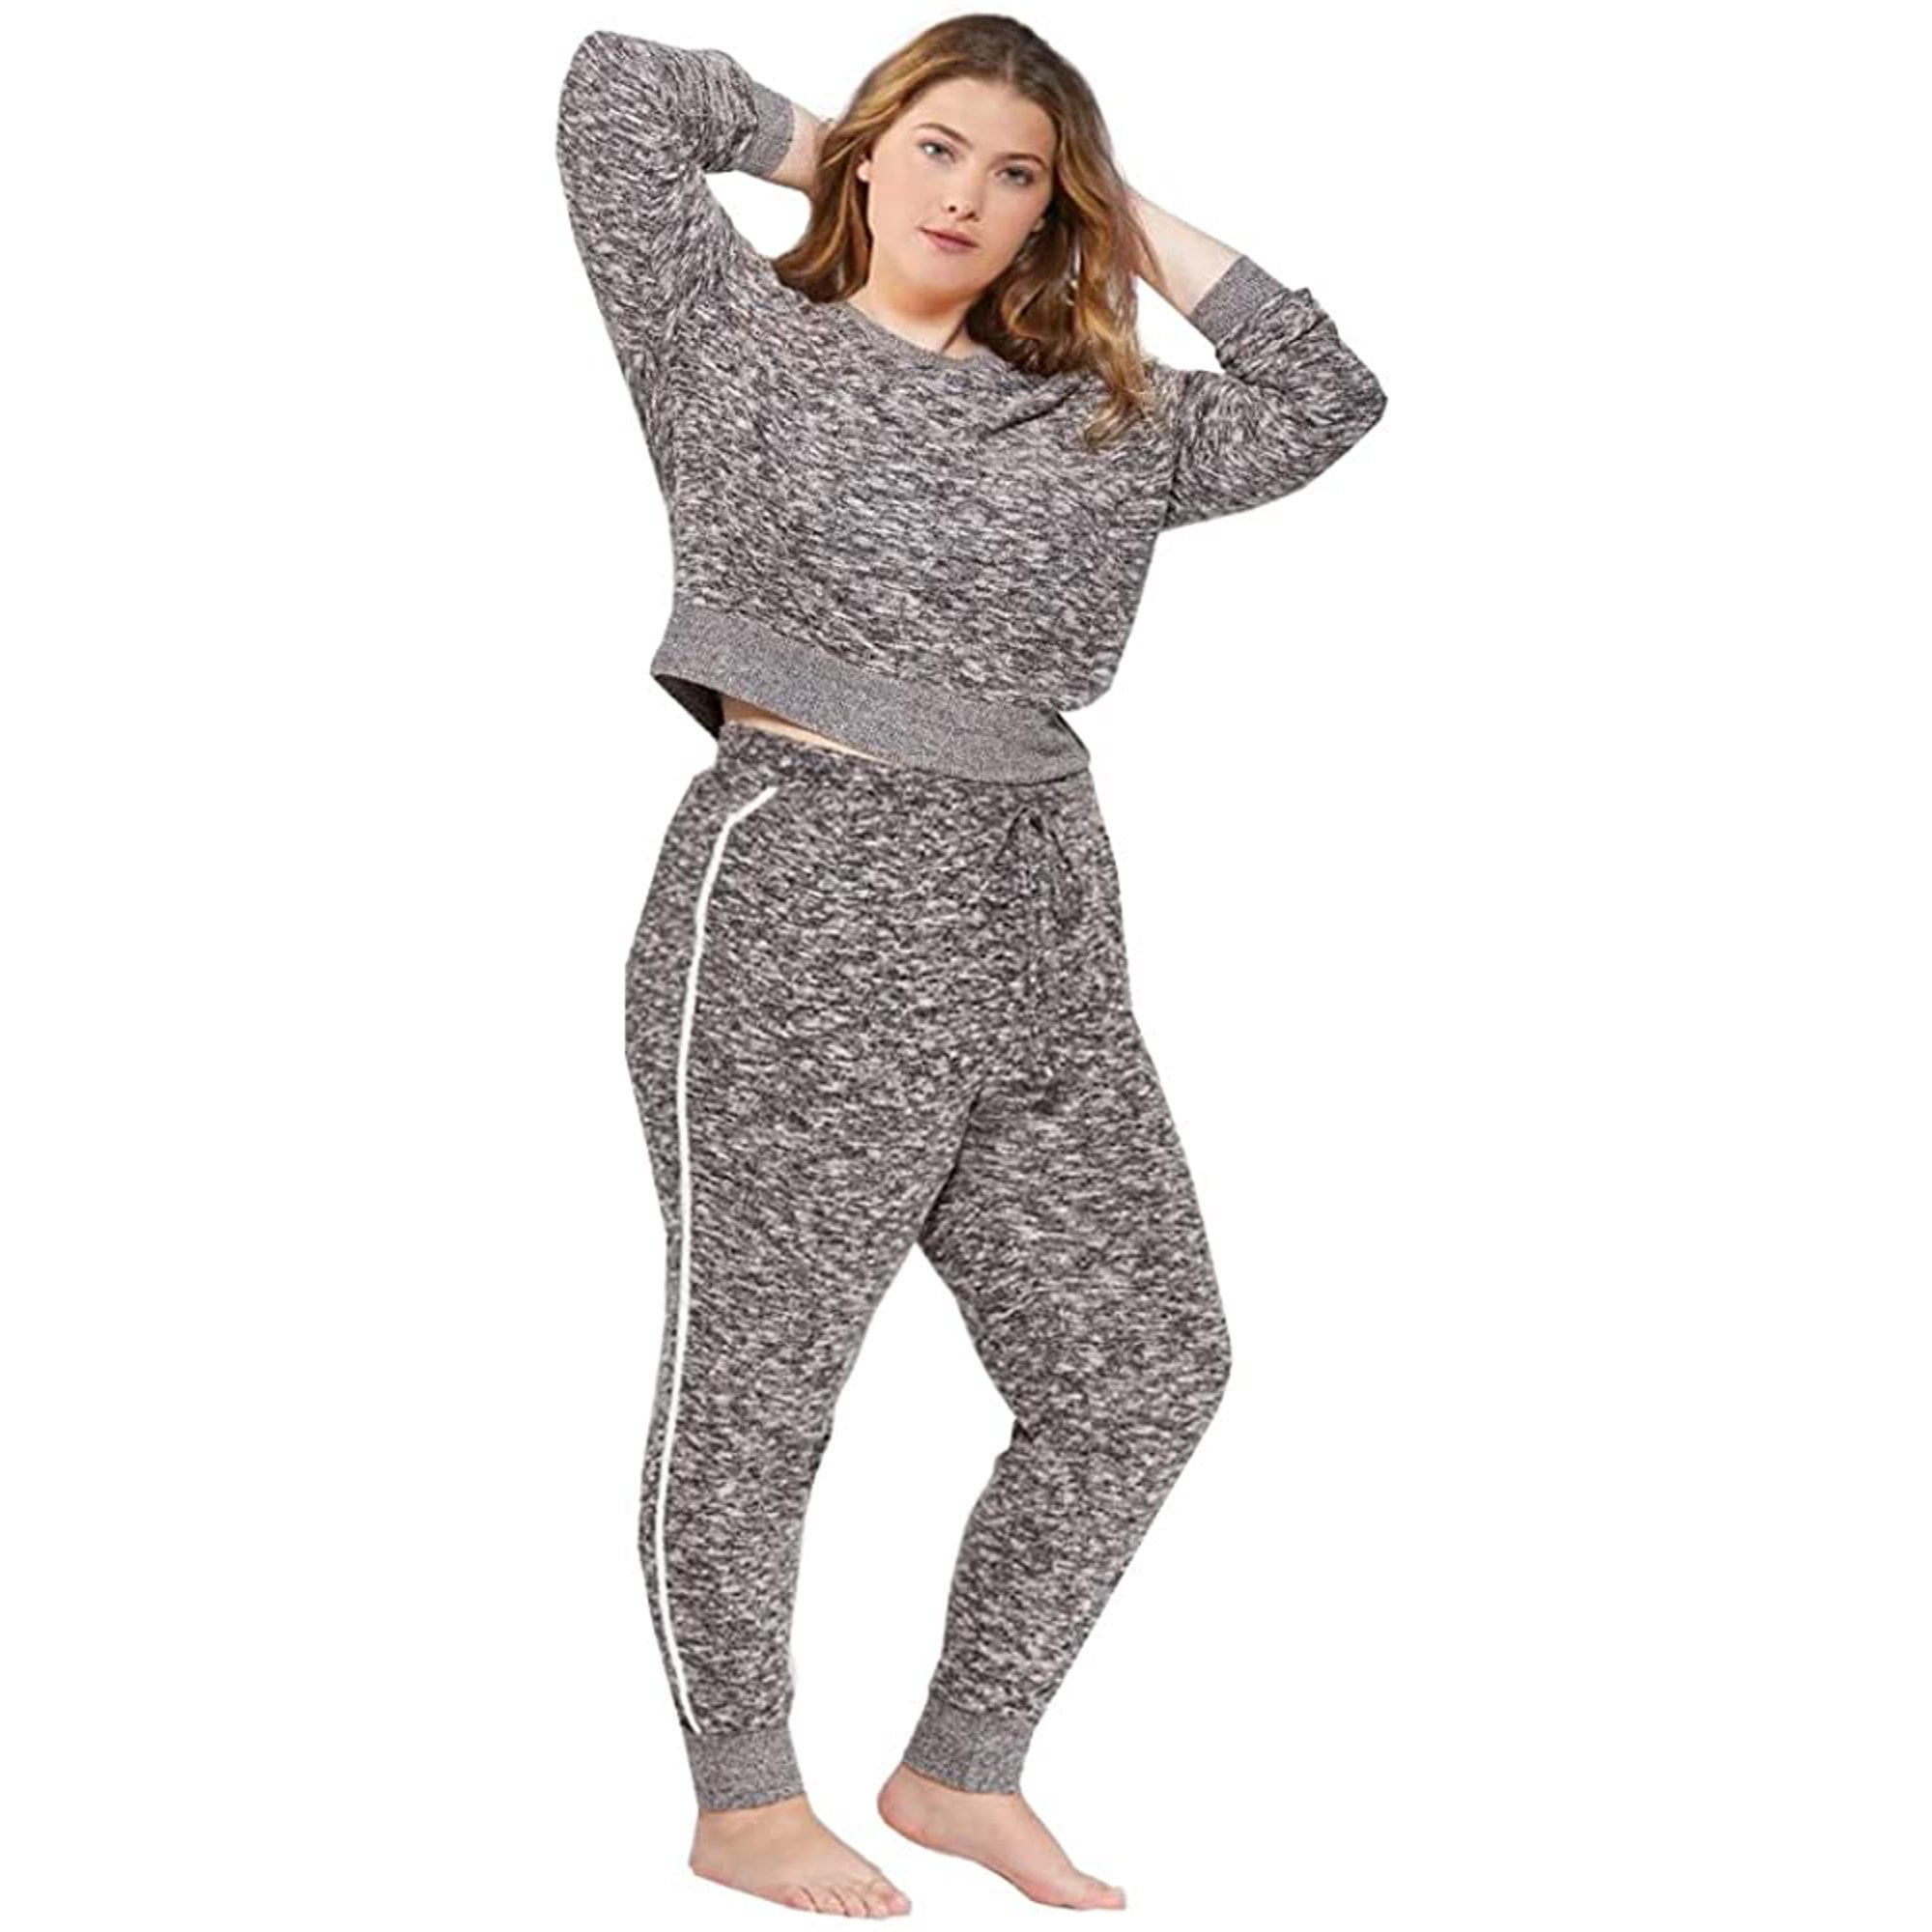 Colsie Plus Lounge 2 Pc Set Outfit, Charcoal Heather, 2X 